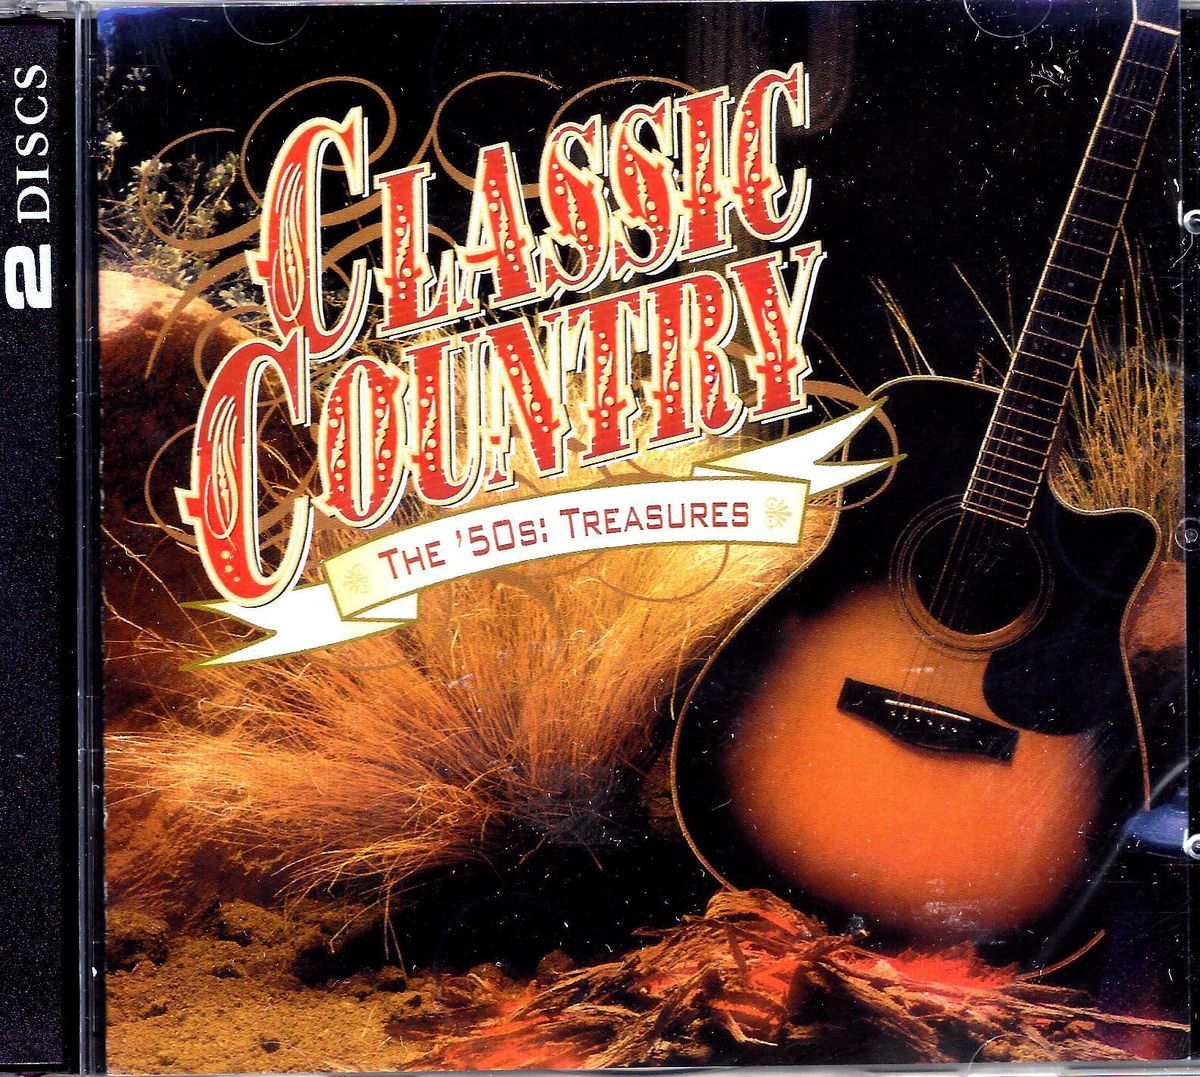 Oldies Classic Country 50s Treasures 2 CD 30 Hits Time Life Brand New